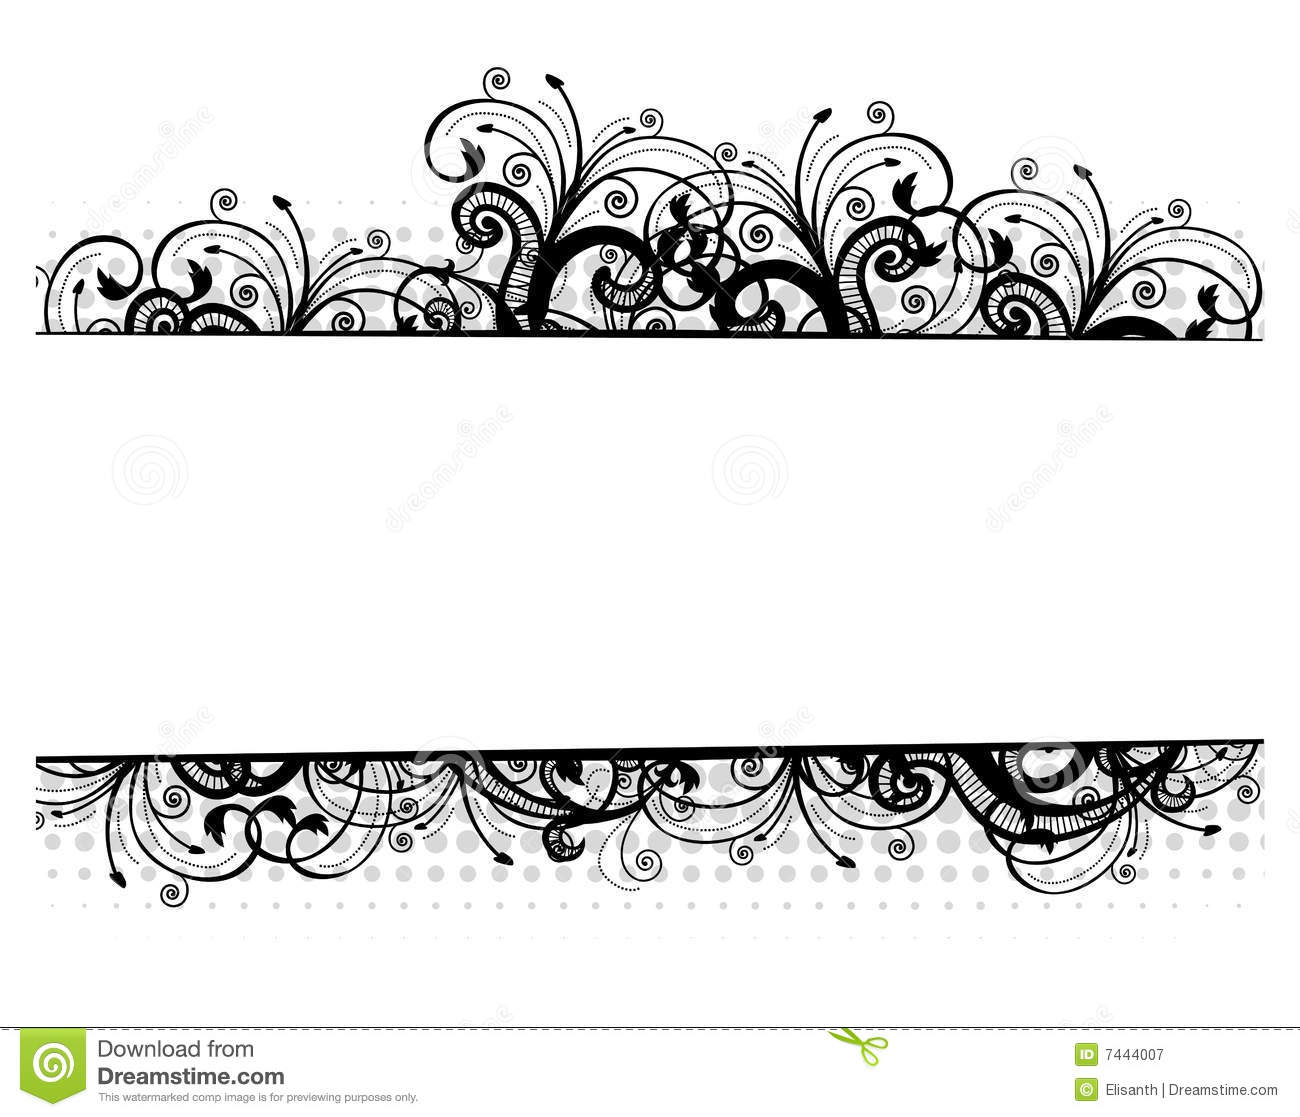 Black and White Floral Border Vector Free